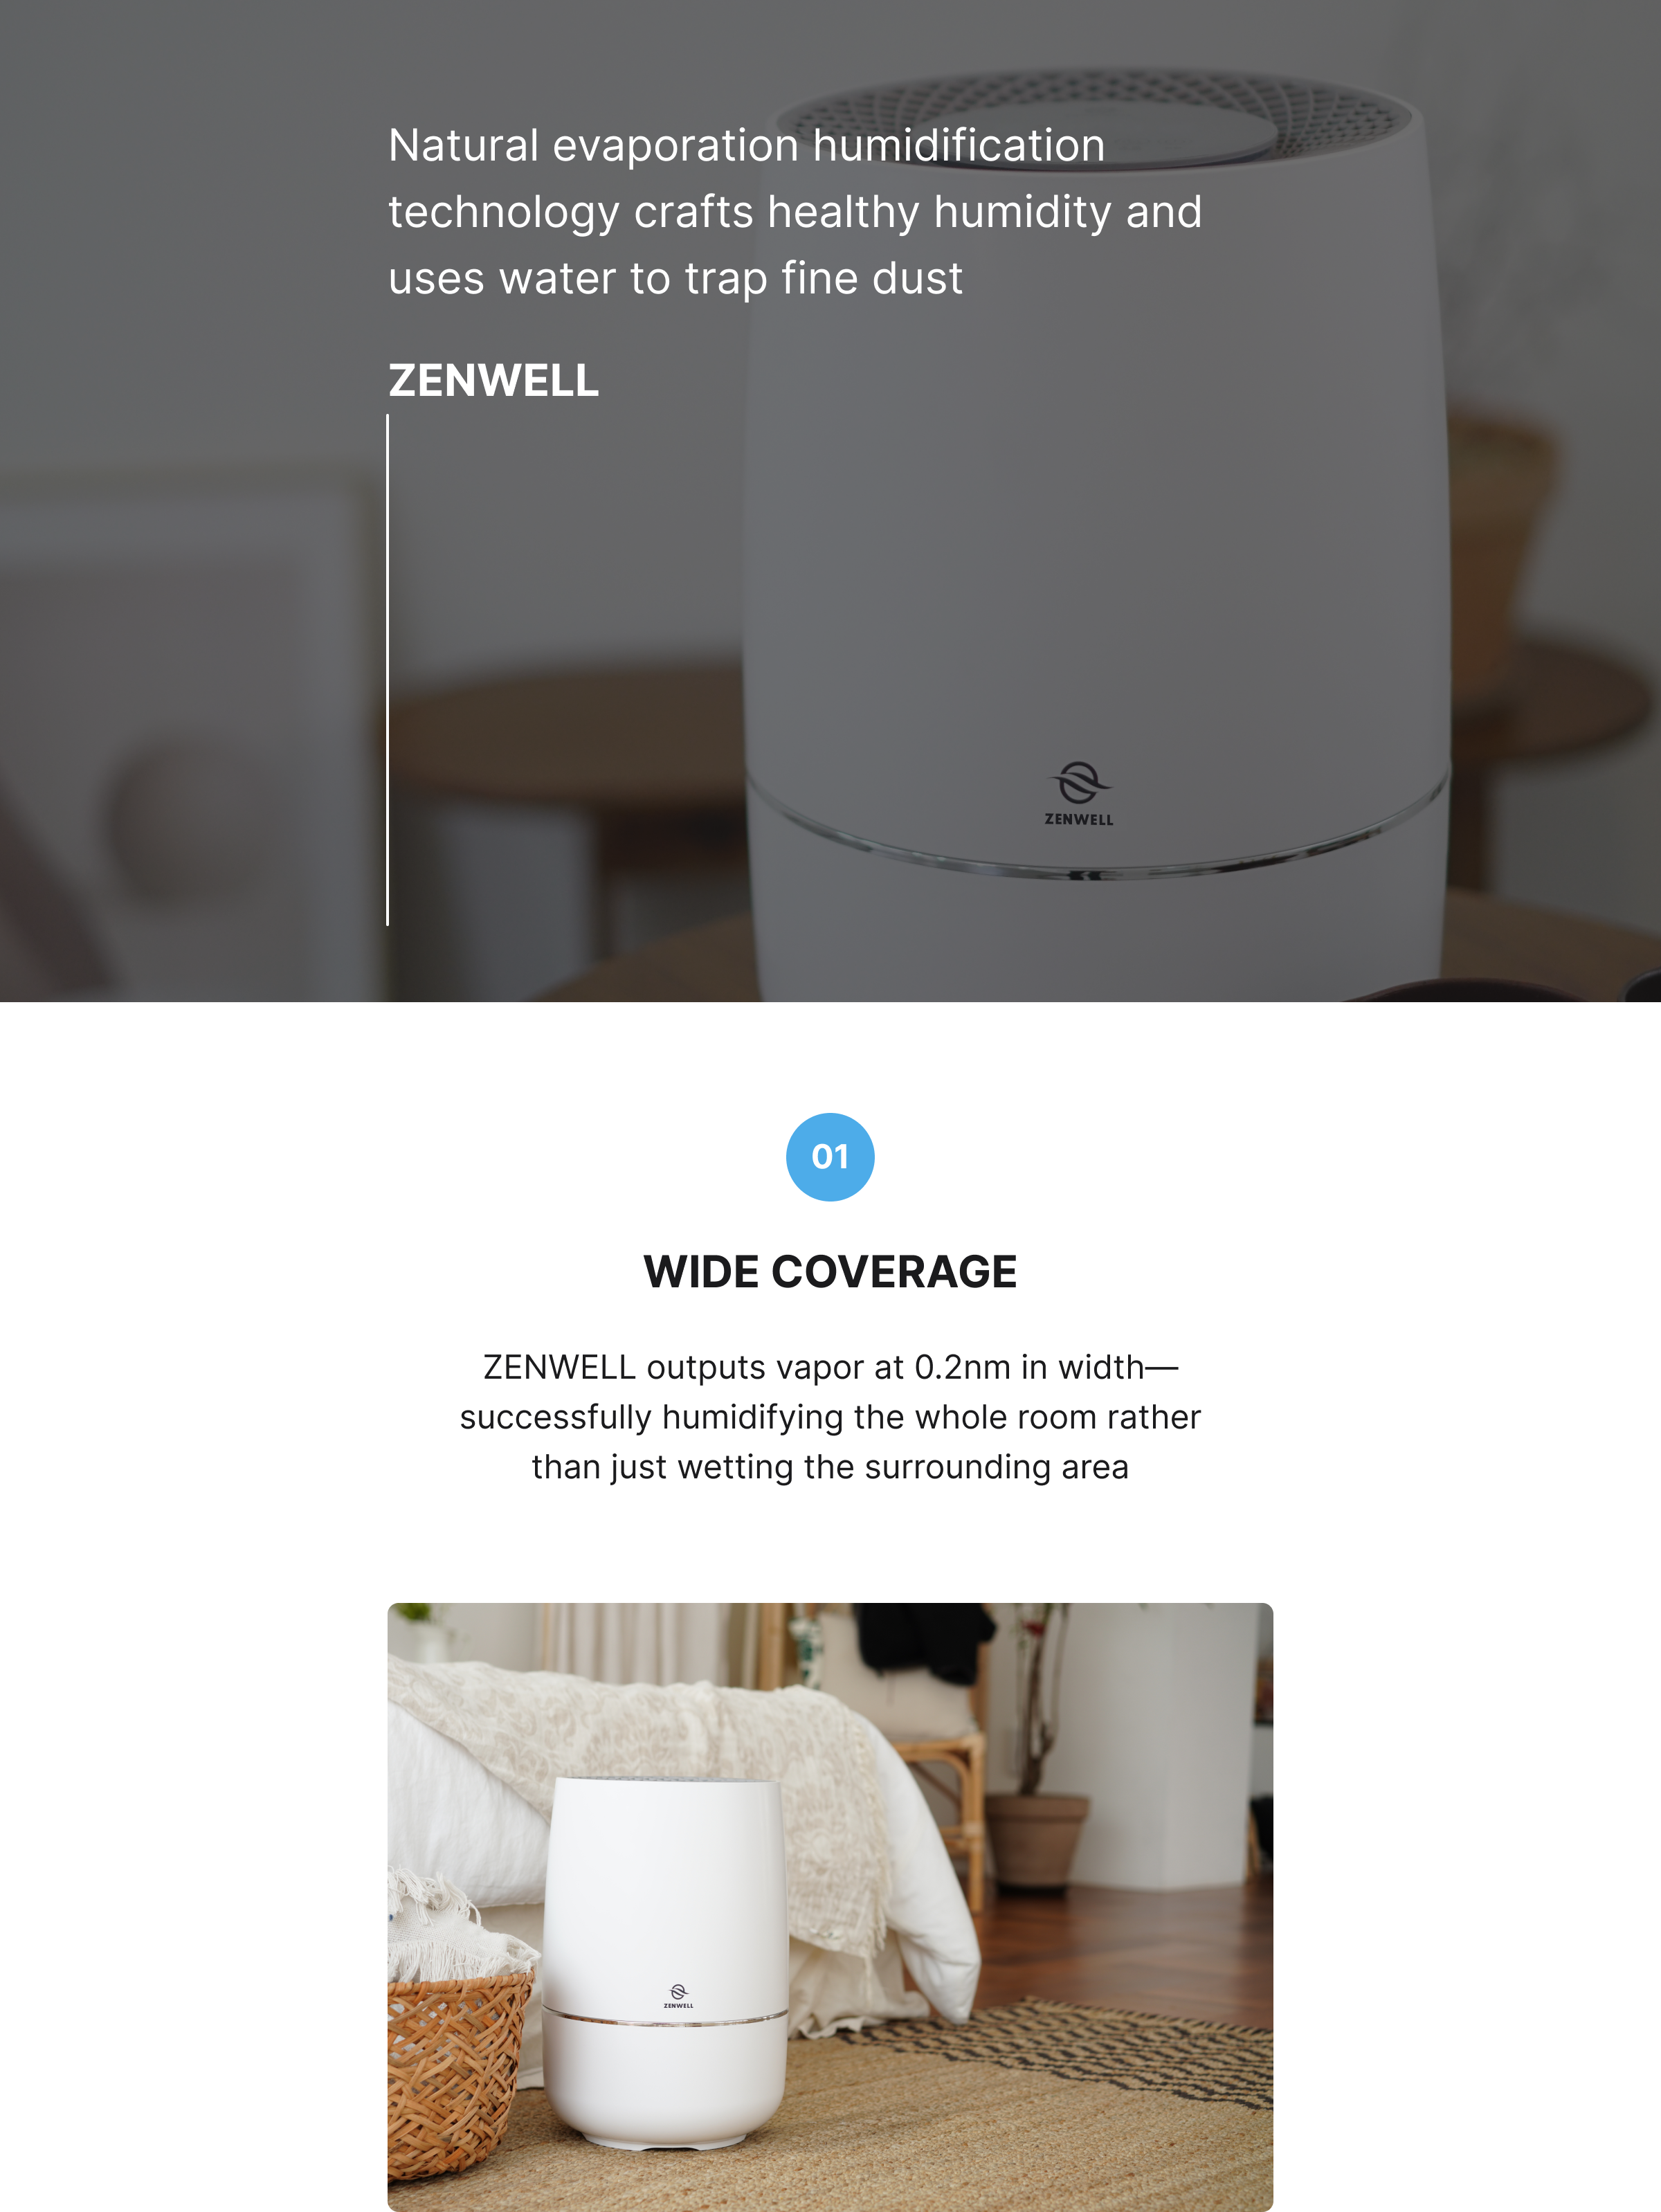 Humidifier product description image describing how natural evaporation humidification crafts healthy humidity and uses water to trap fine dust. Zenwell's device outputs vapor at 0.2nm in width—successfully humidifying the whole room rather than just wetting the surrounding area.